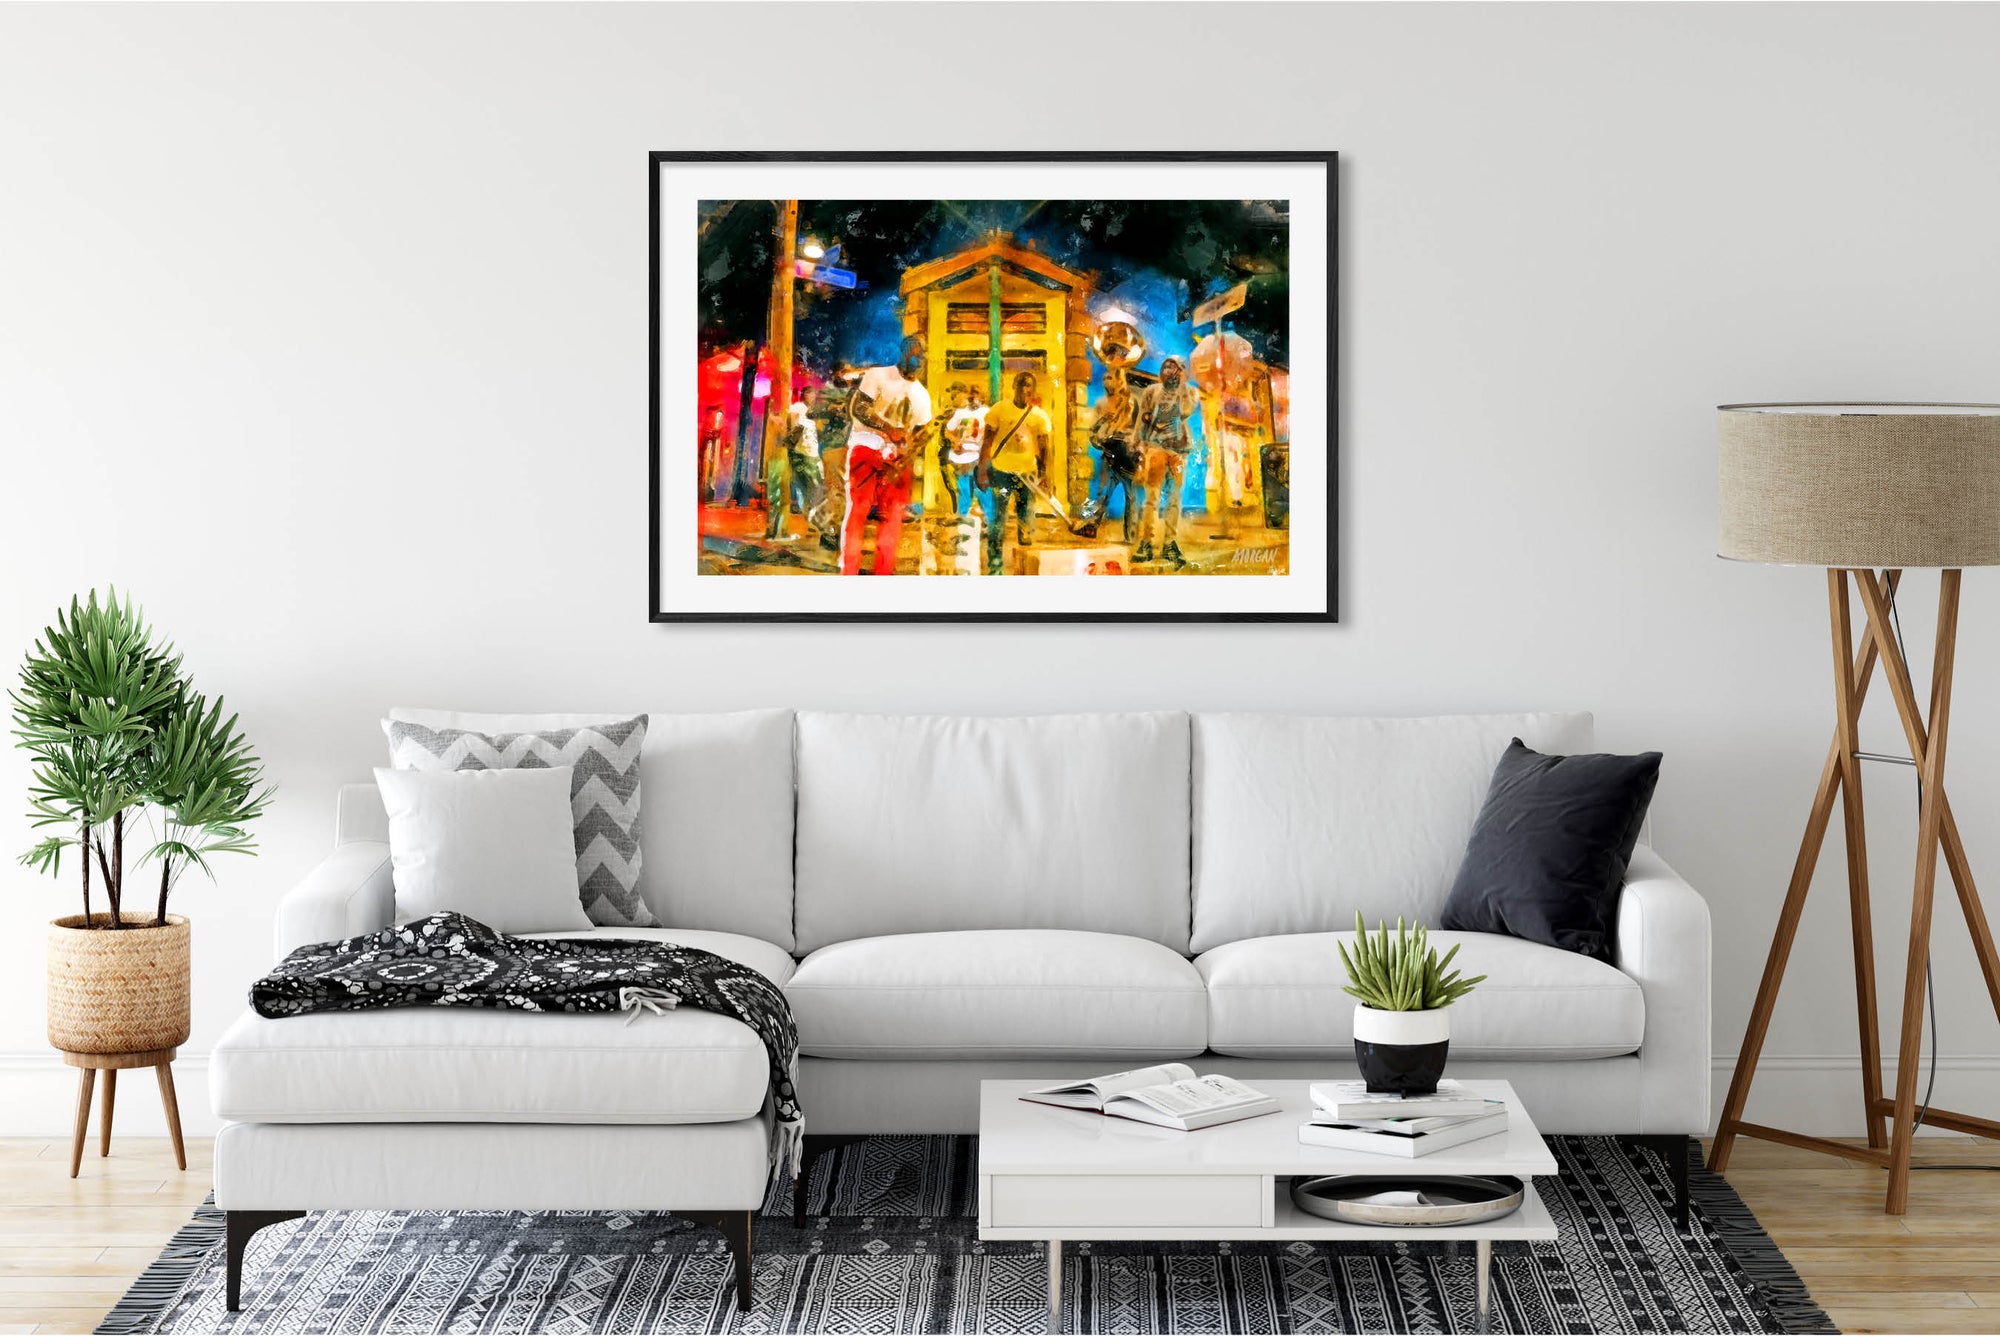 The Buskers - New Orleans Art Print in Room